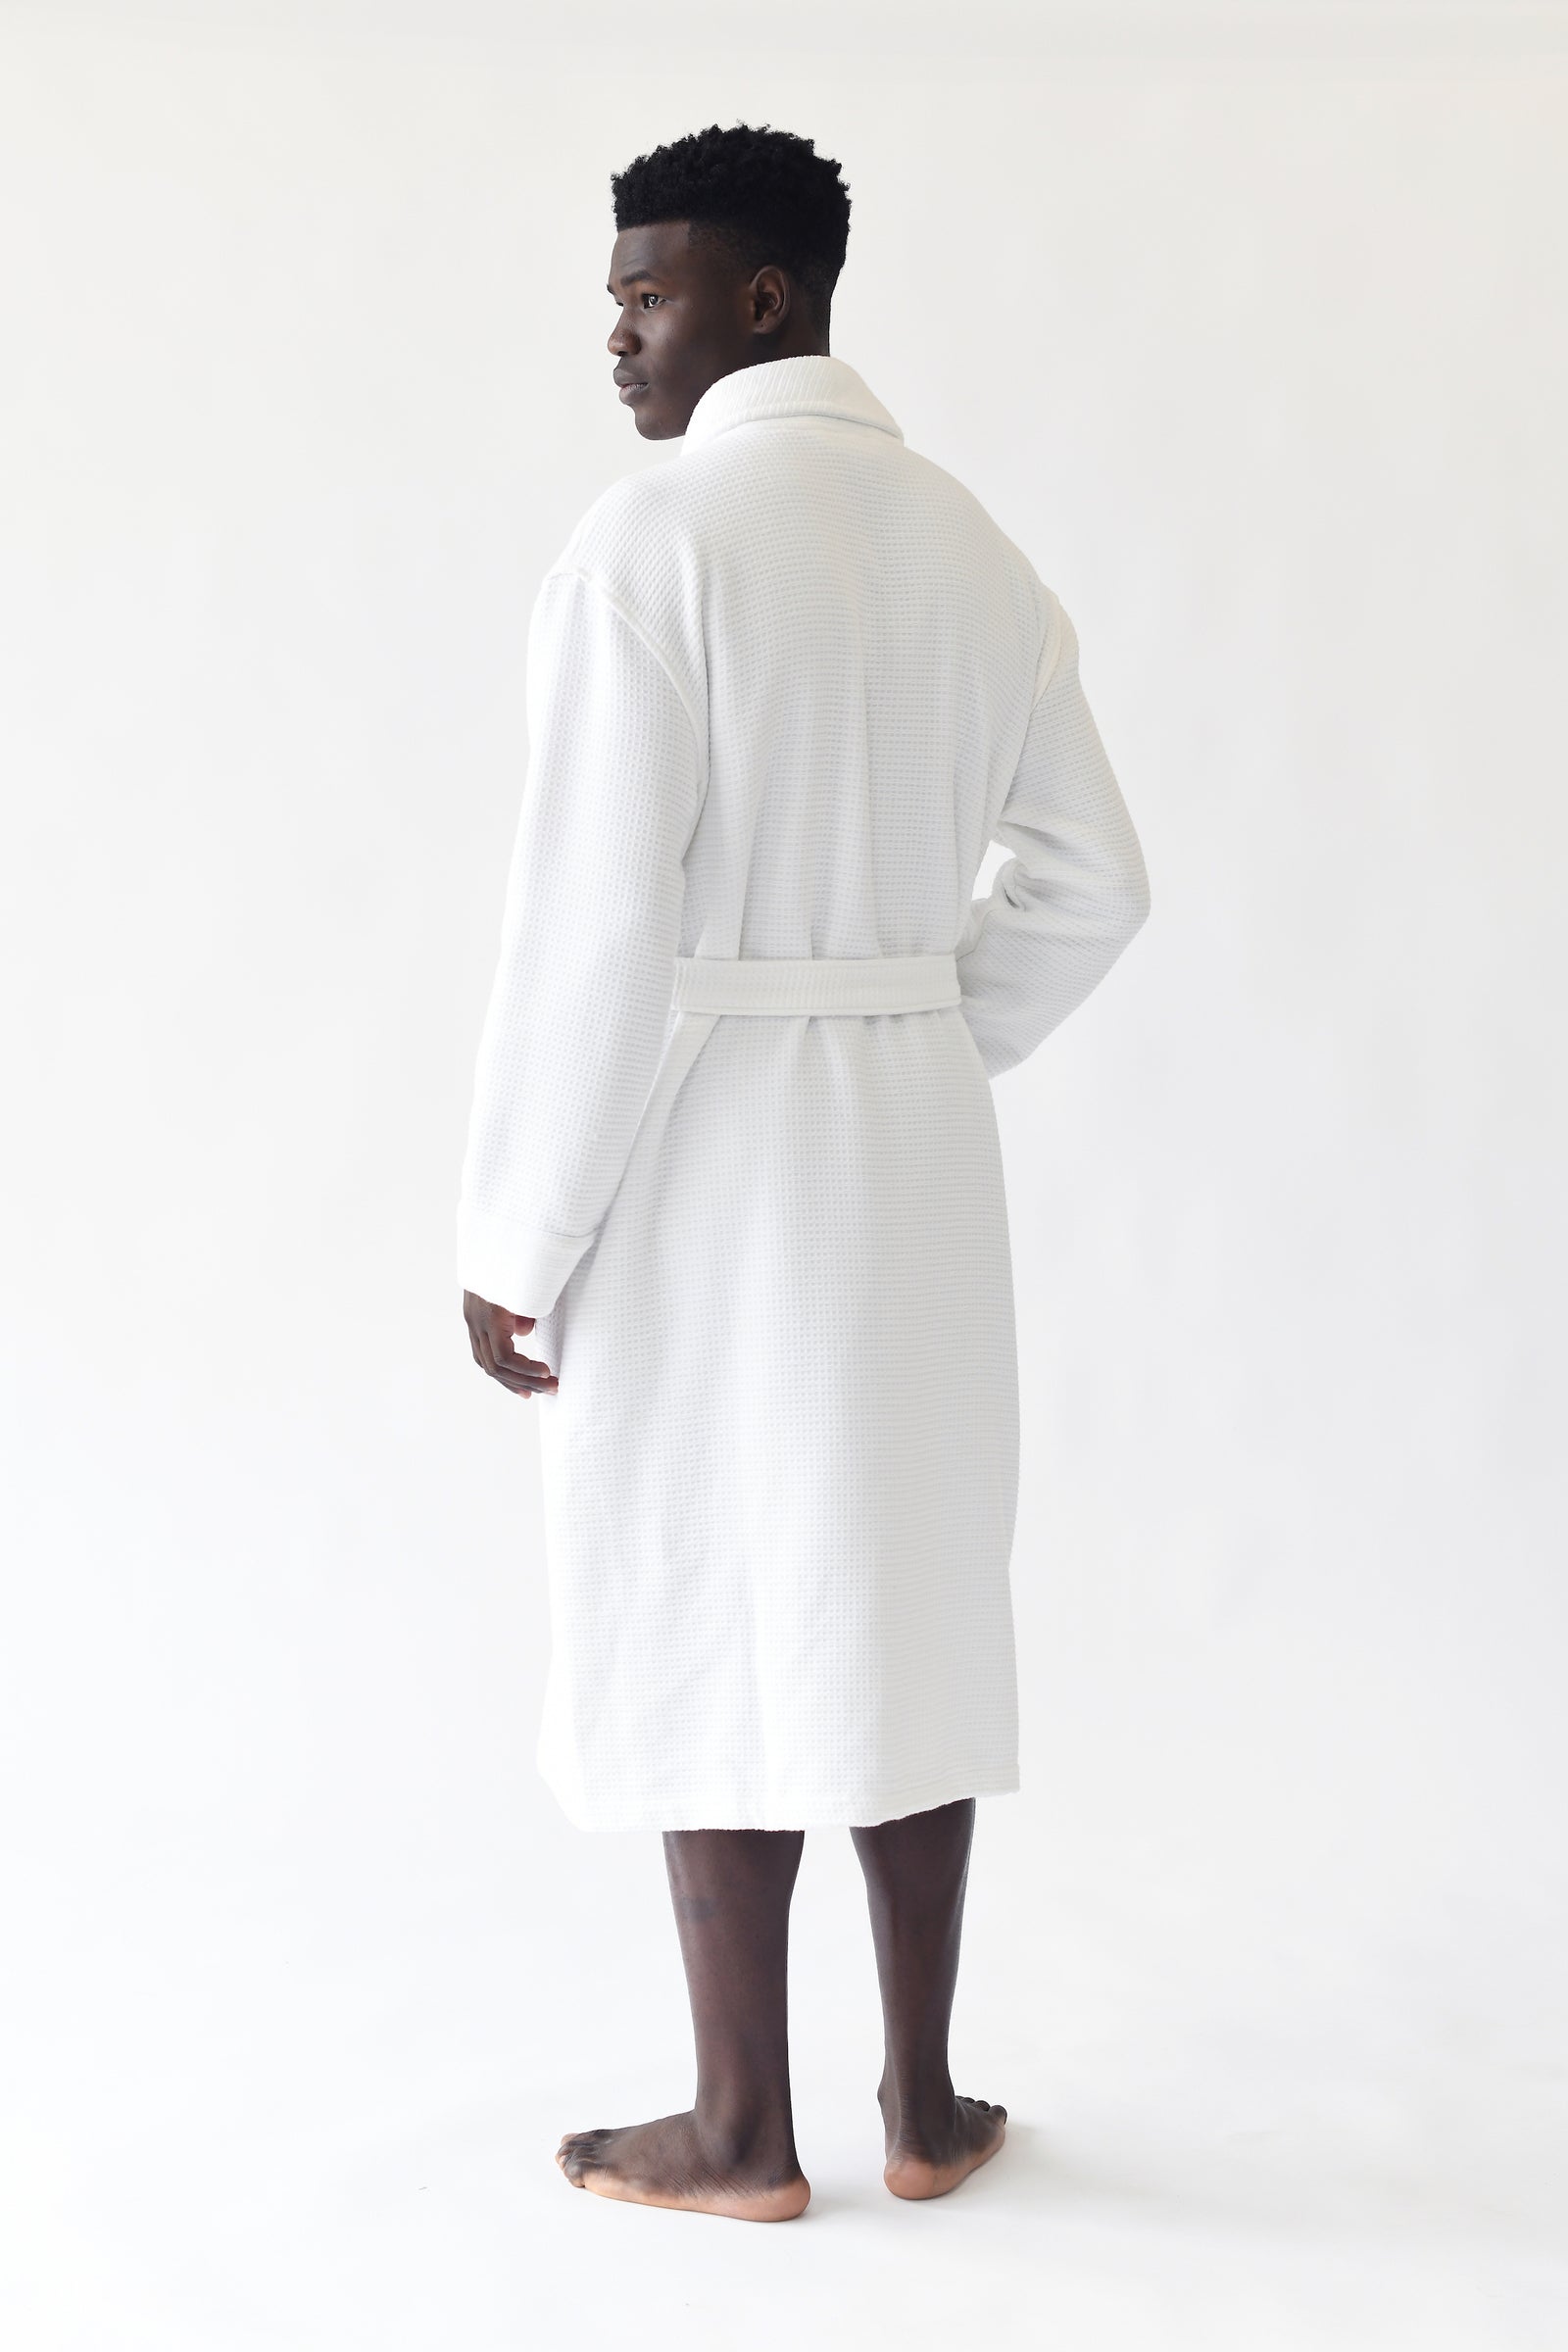 Man wearing Bamboo Waffle Bath robe standing in front of a with a white background. 